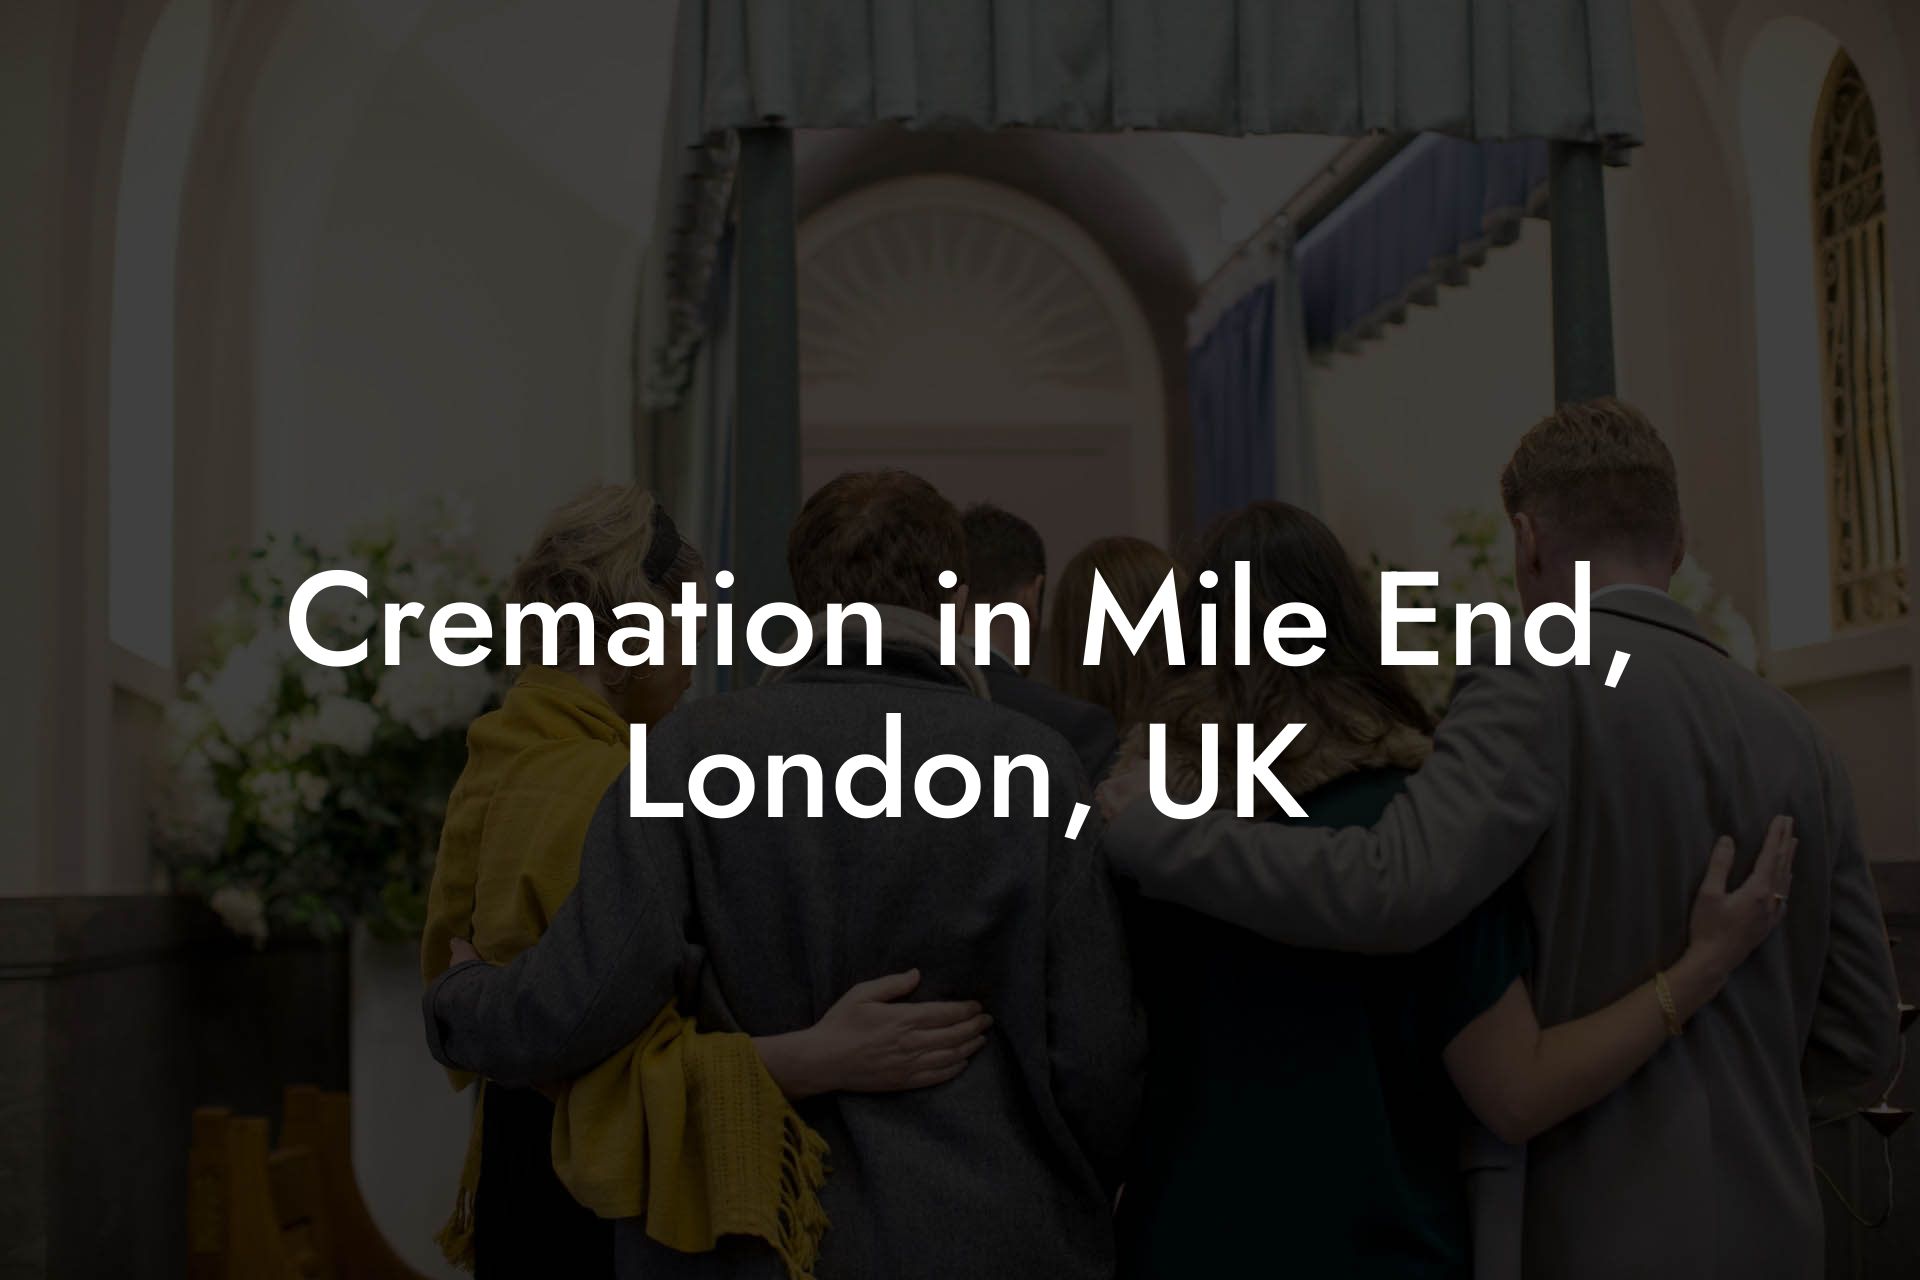 Cremation in Mile End, London, UK